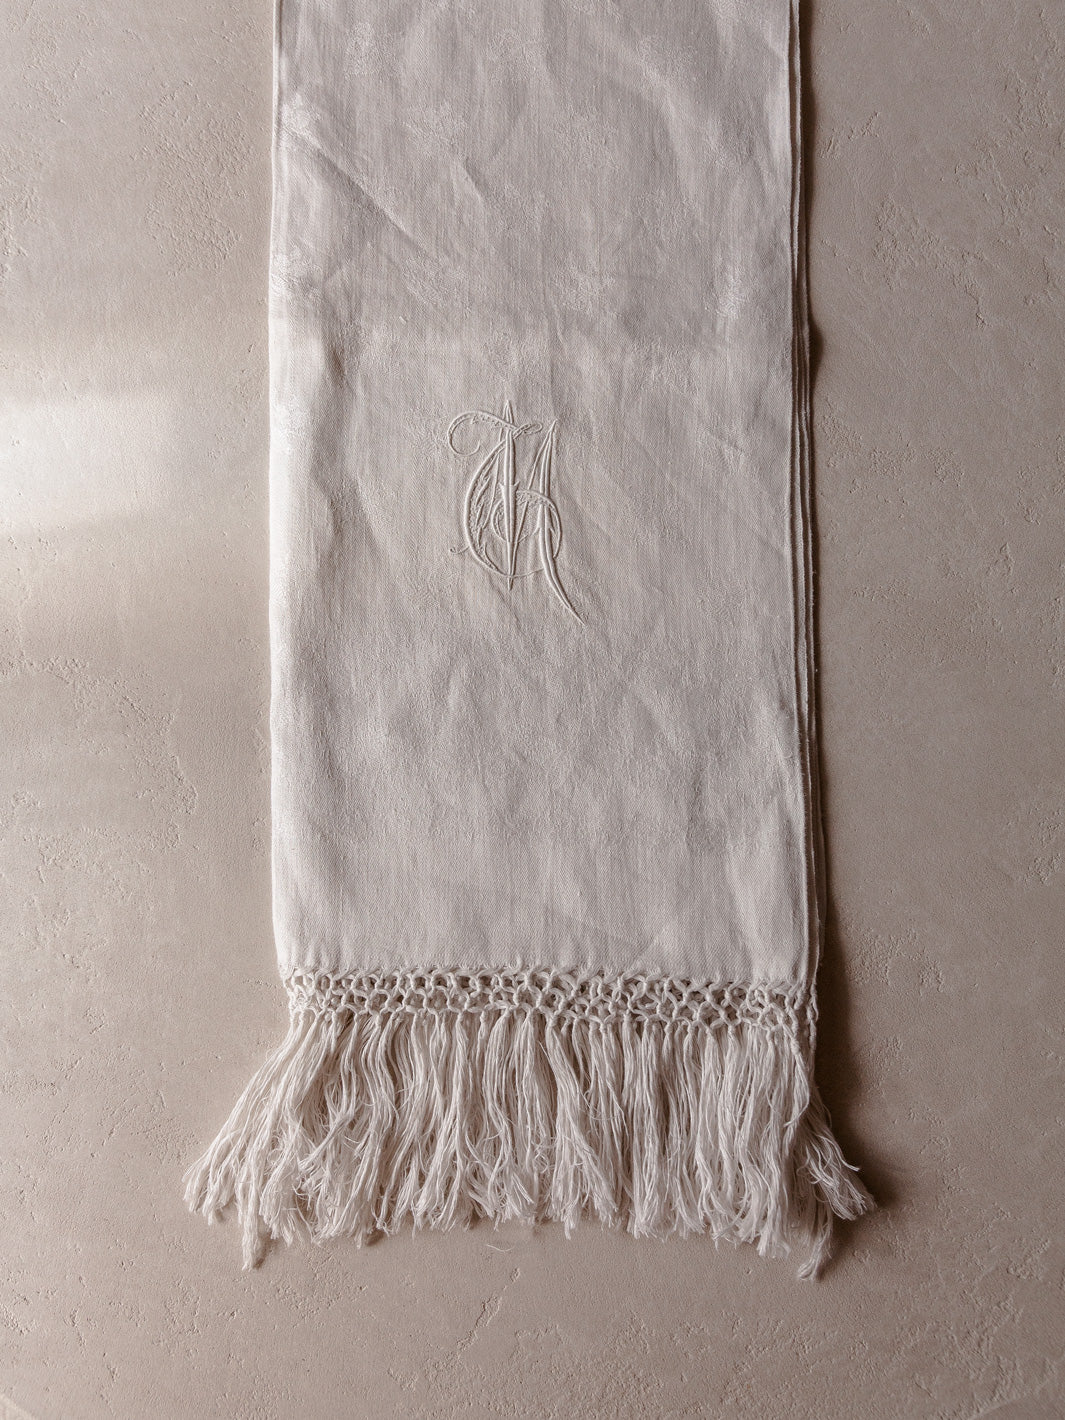 Italian 40's cotton embroidered towel